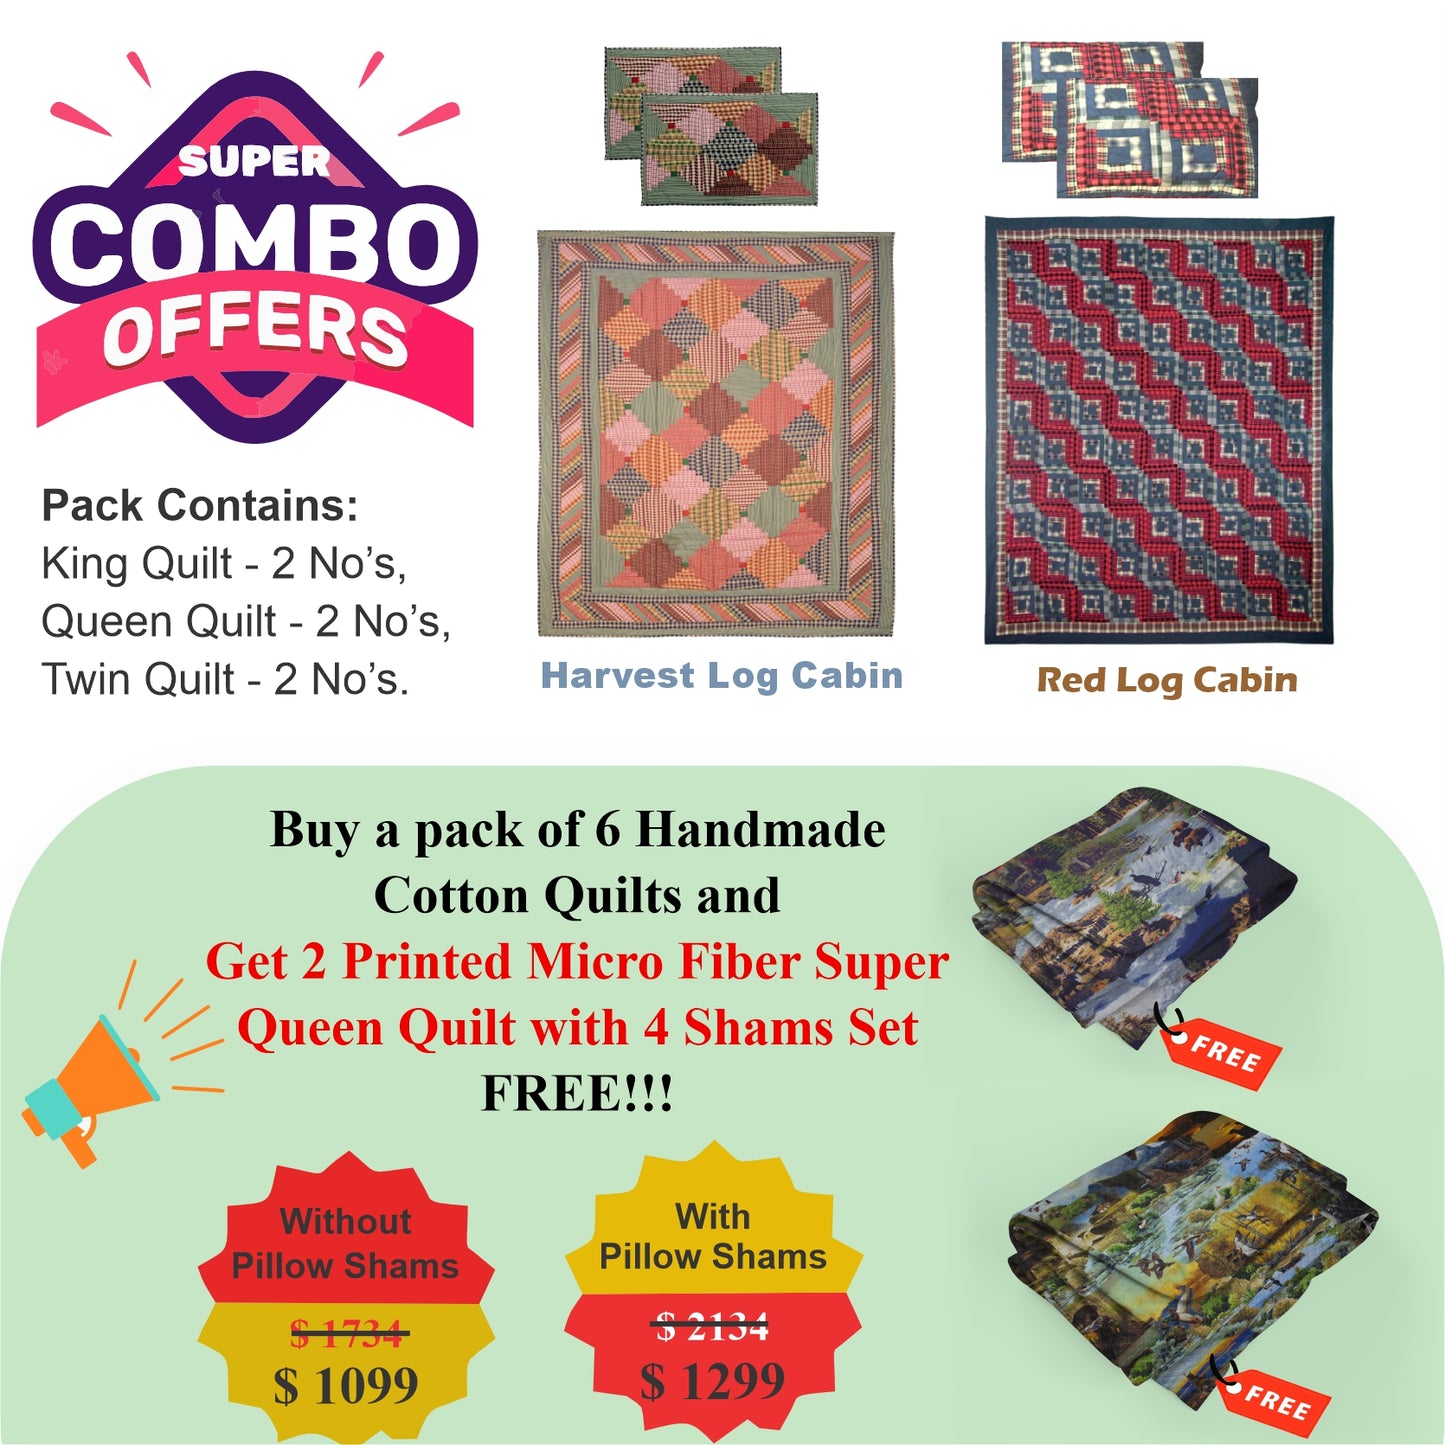 Harvest Log Cabin/Red Log Cabin  - Pack of 6 handmade cotton quilts | Matching Pillow shams | Buy 6 cotton quilts and get 2 Printed Microfiber Super Queen Quilt with 2 Shams